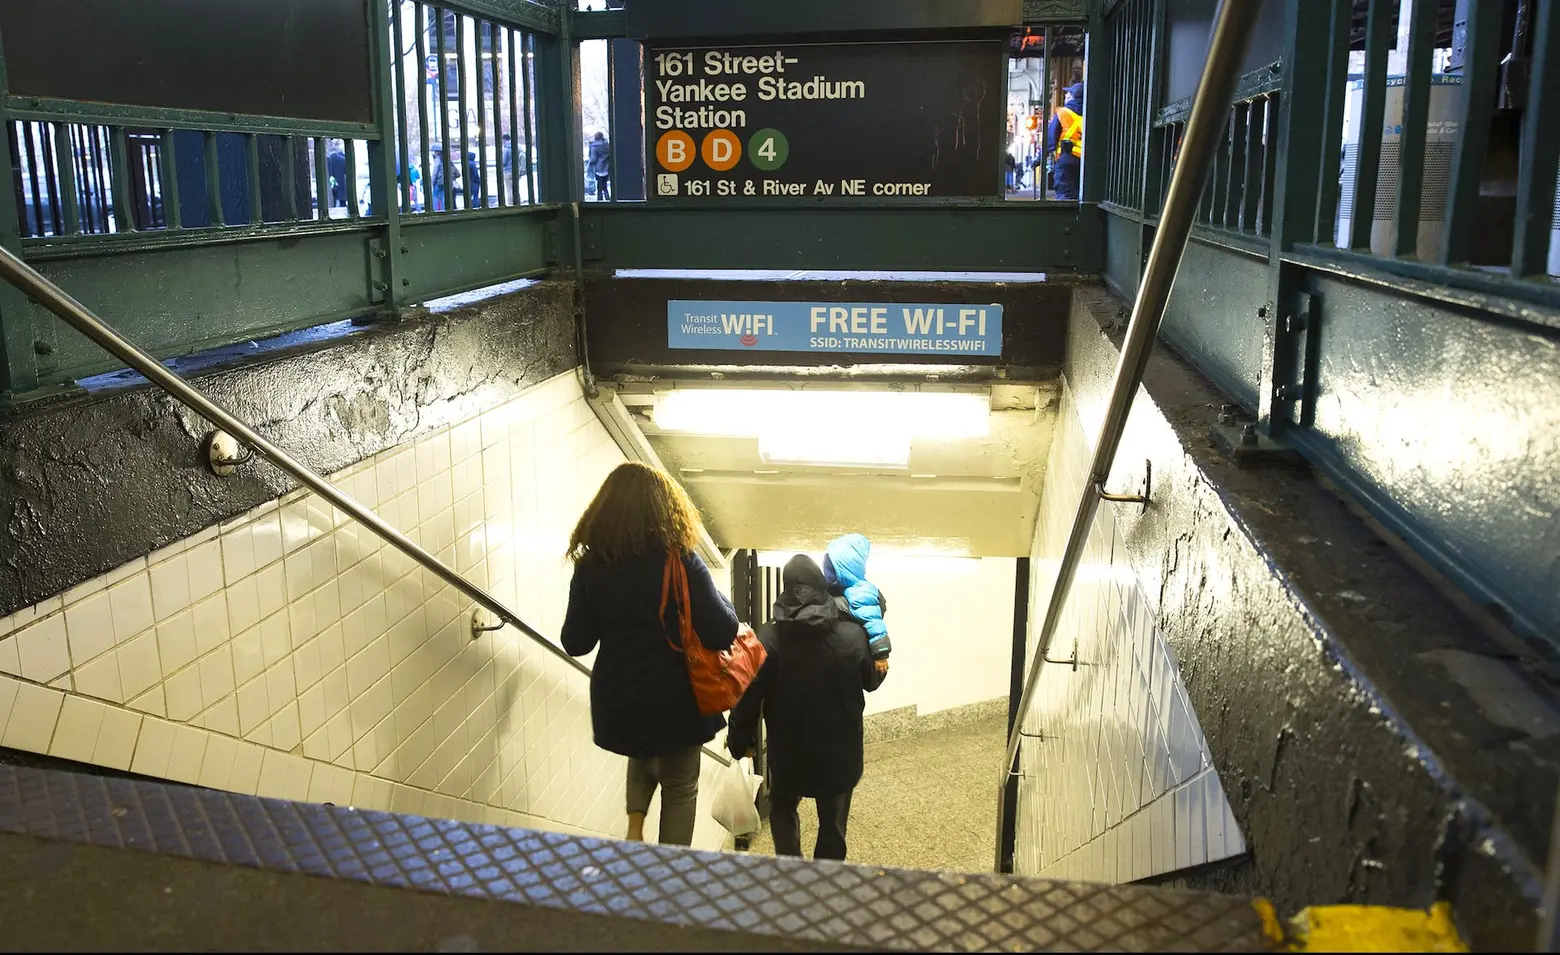 4 and Q trains are taking this weekend off